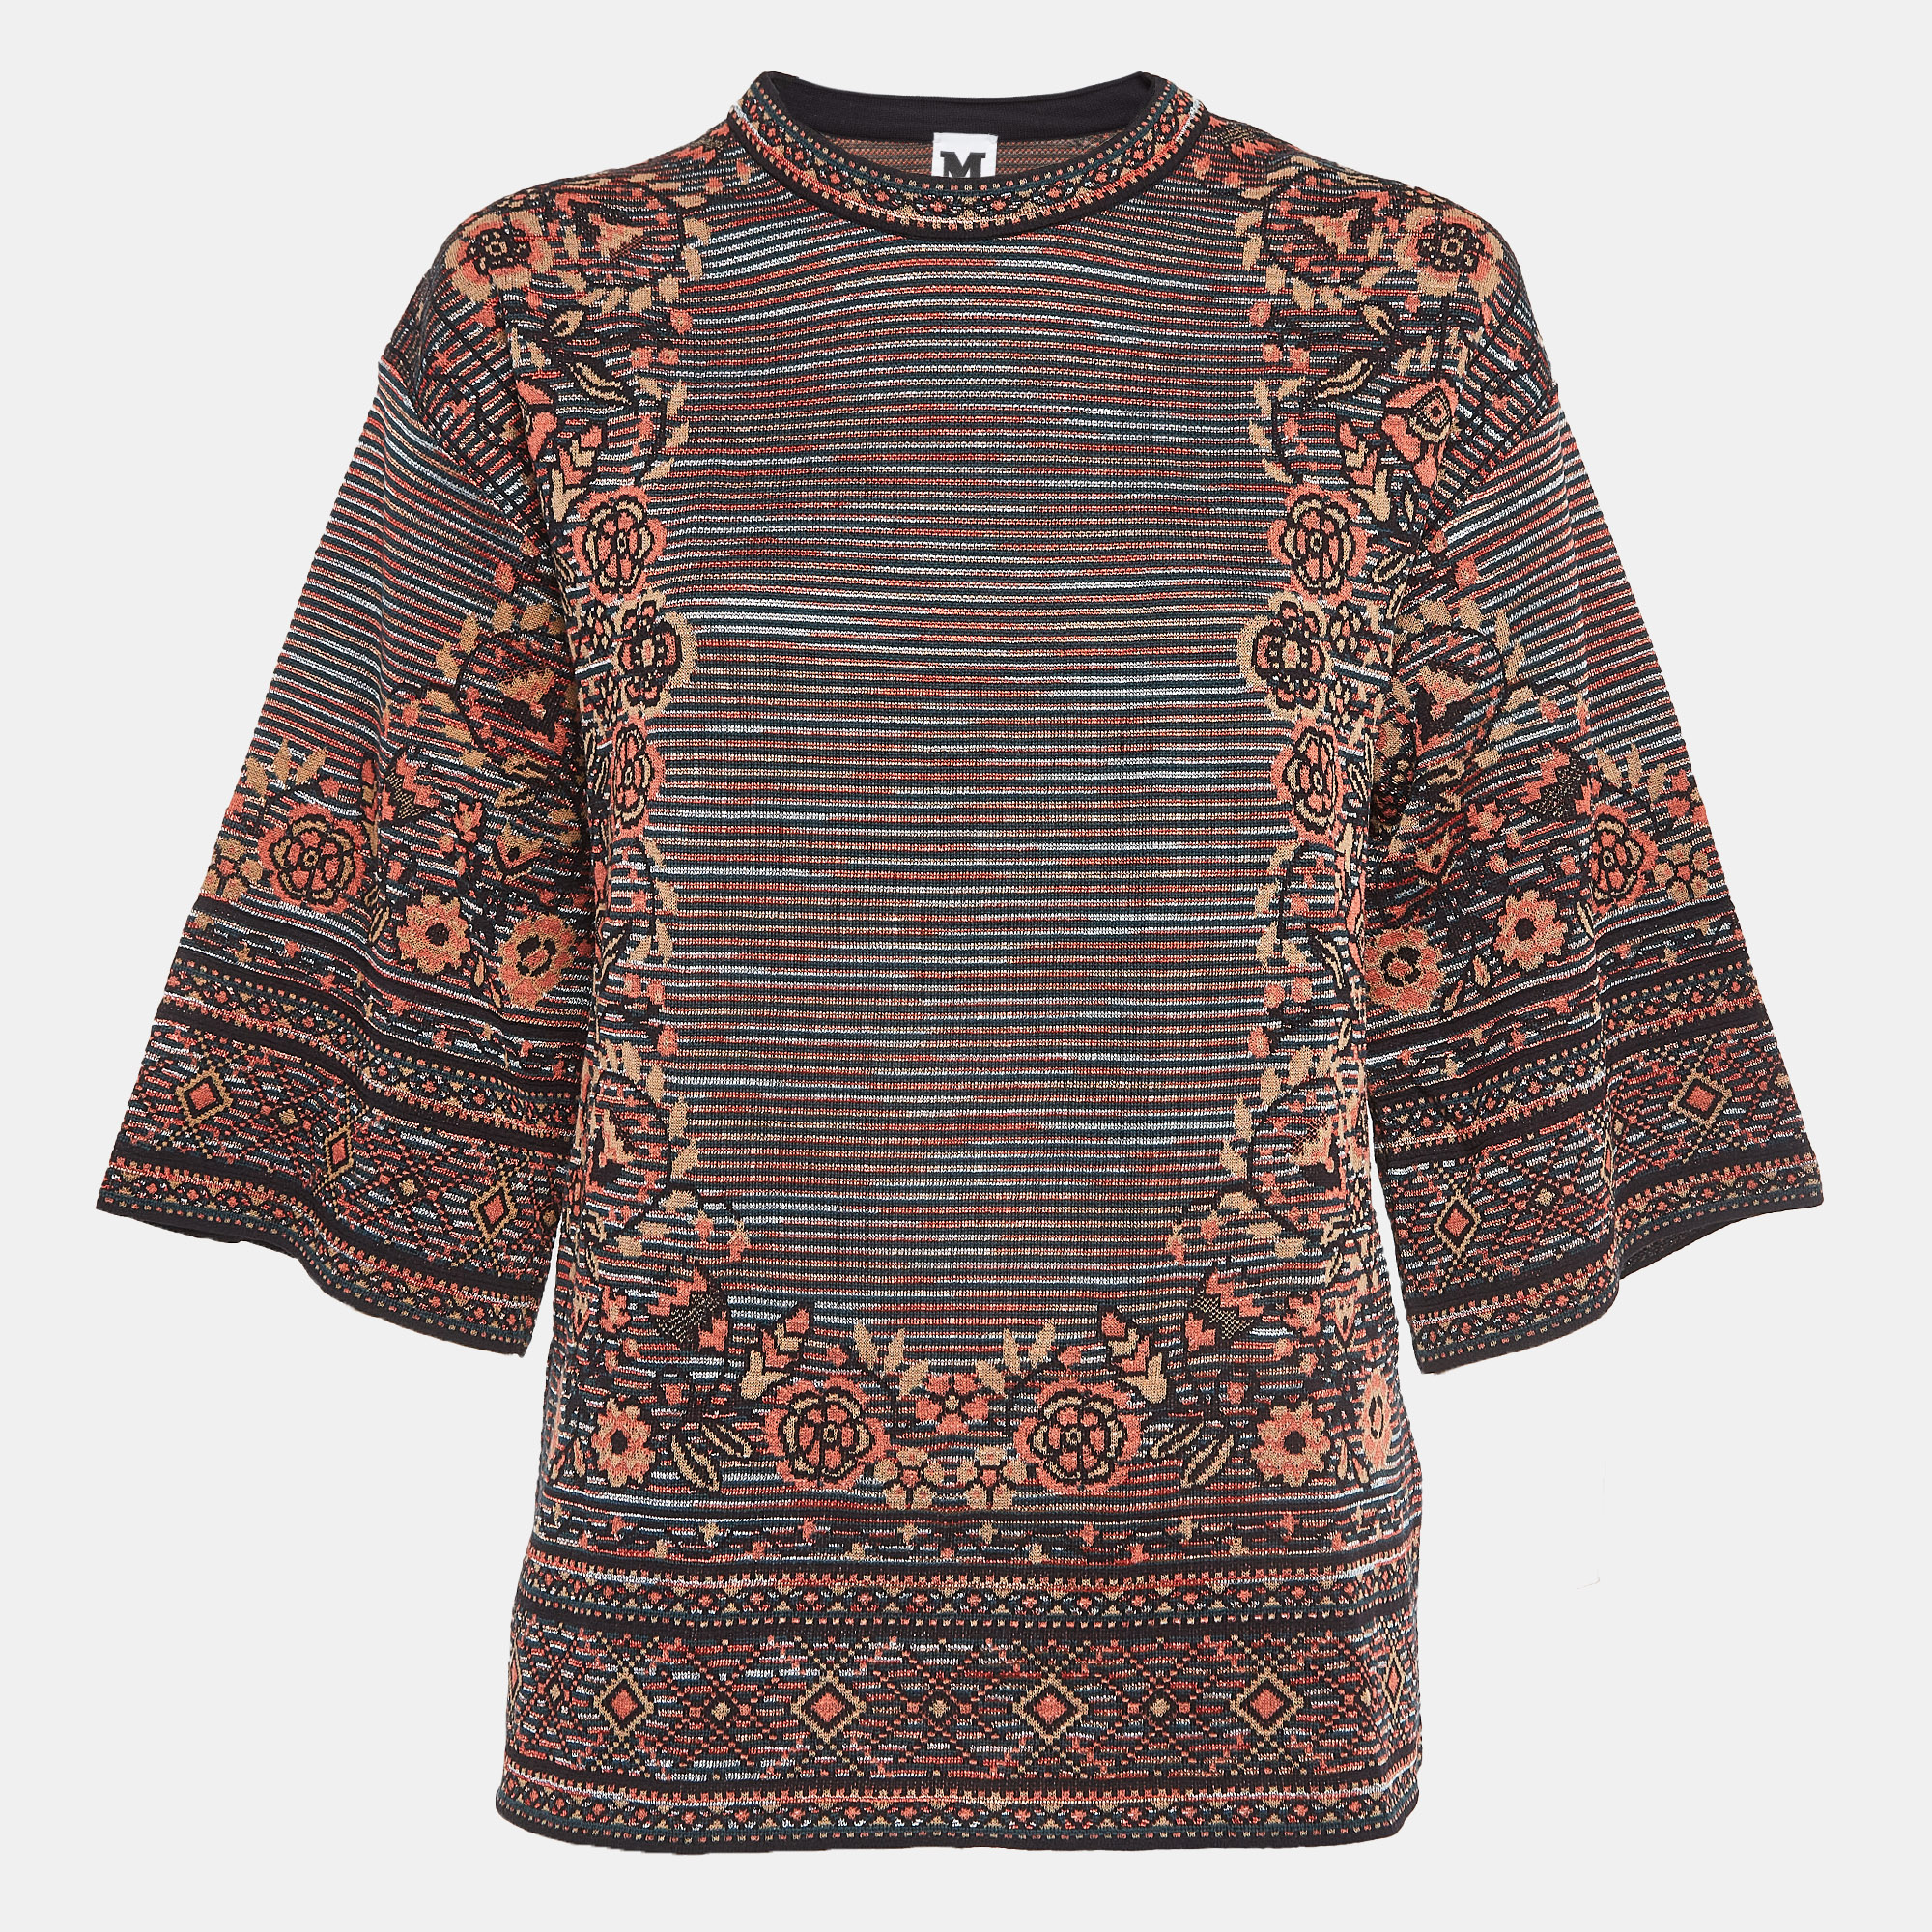 M missoni brown floral intarsia knit long sleeve top m